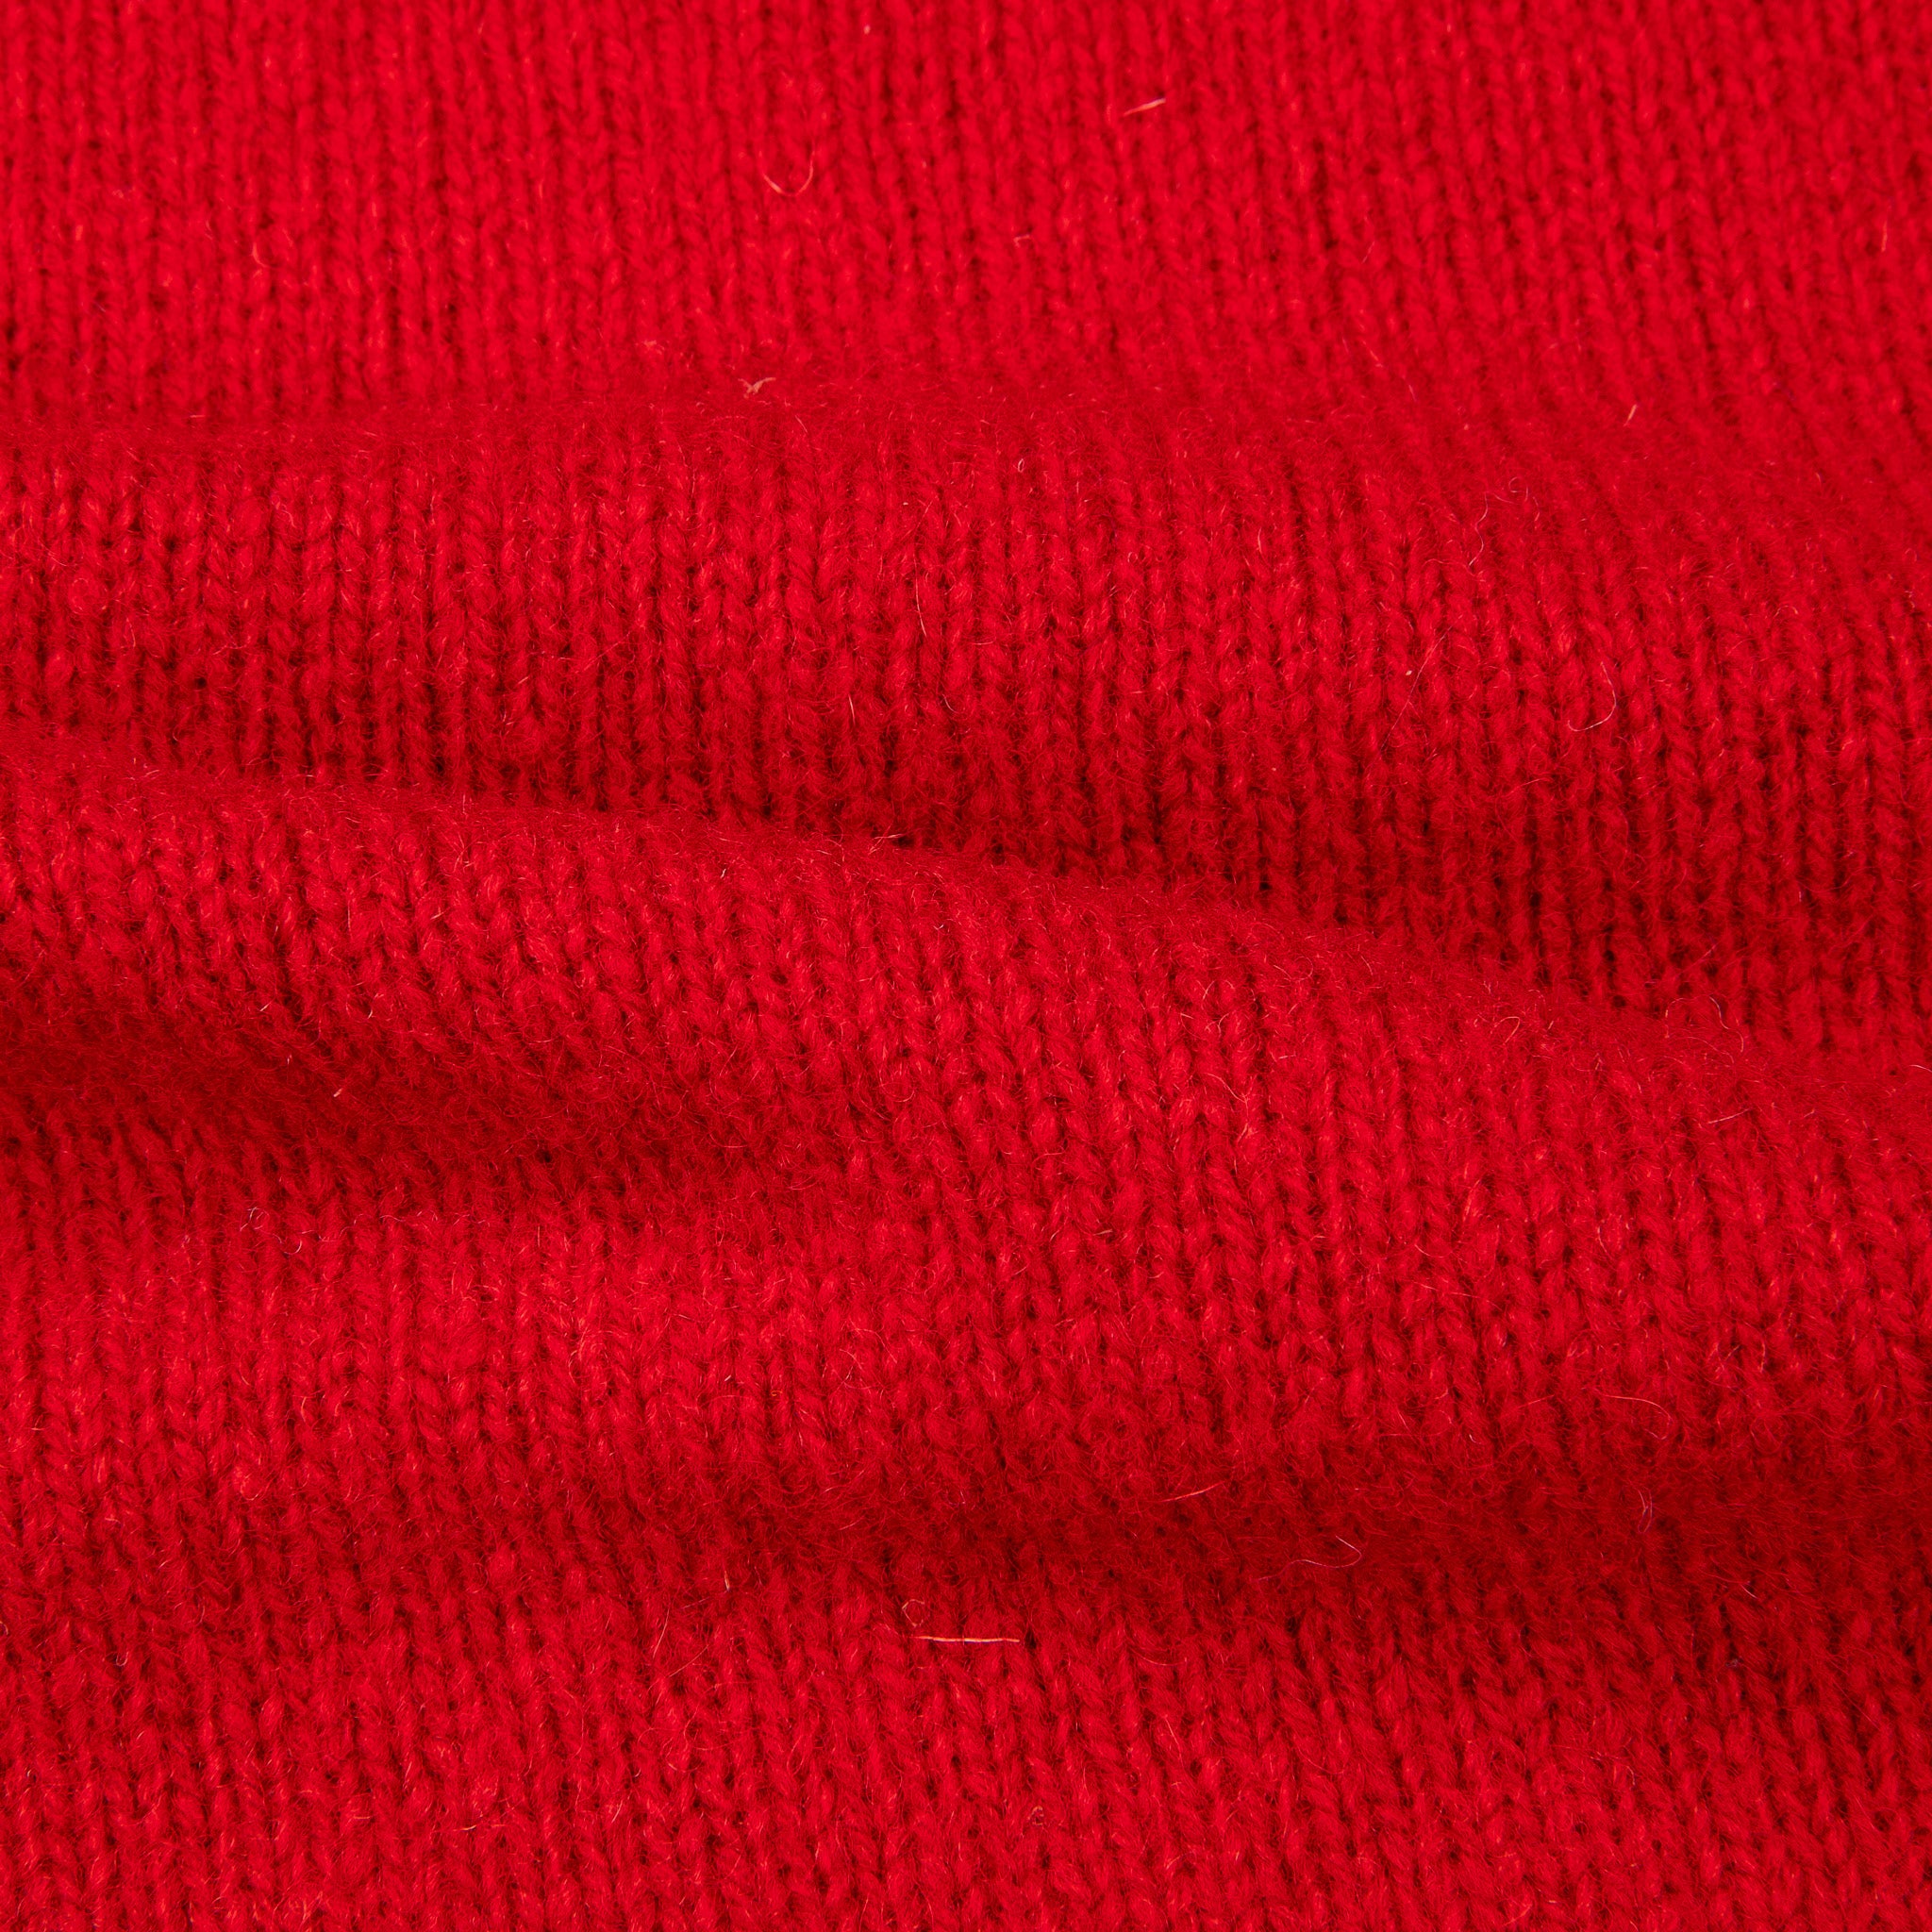 Laurence J. Smith Super Soft Seamless Roll Neck Pullover Tudor